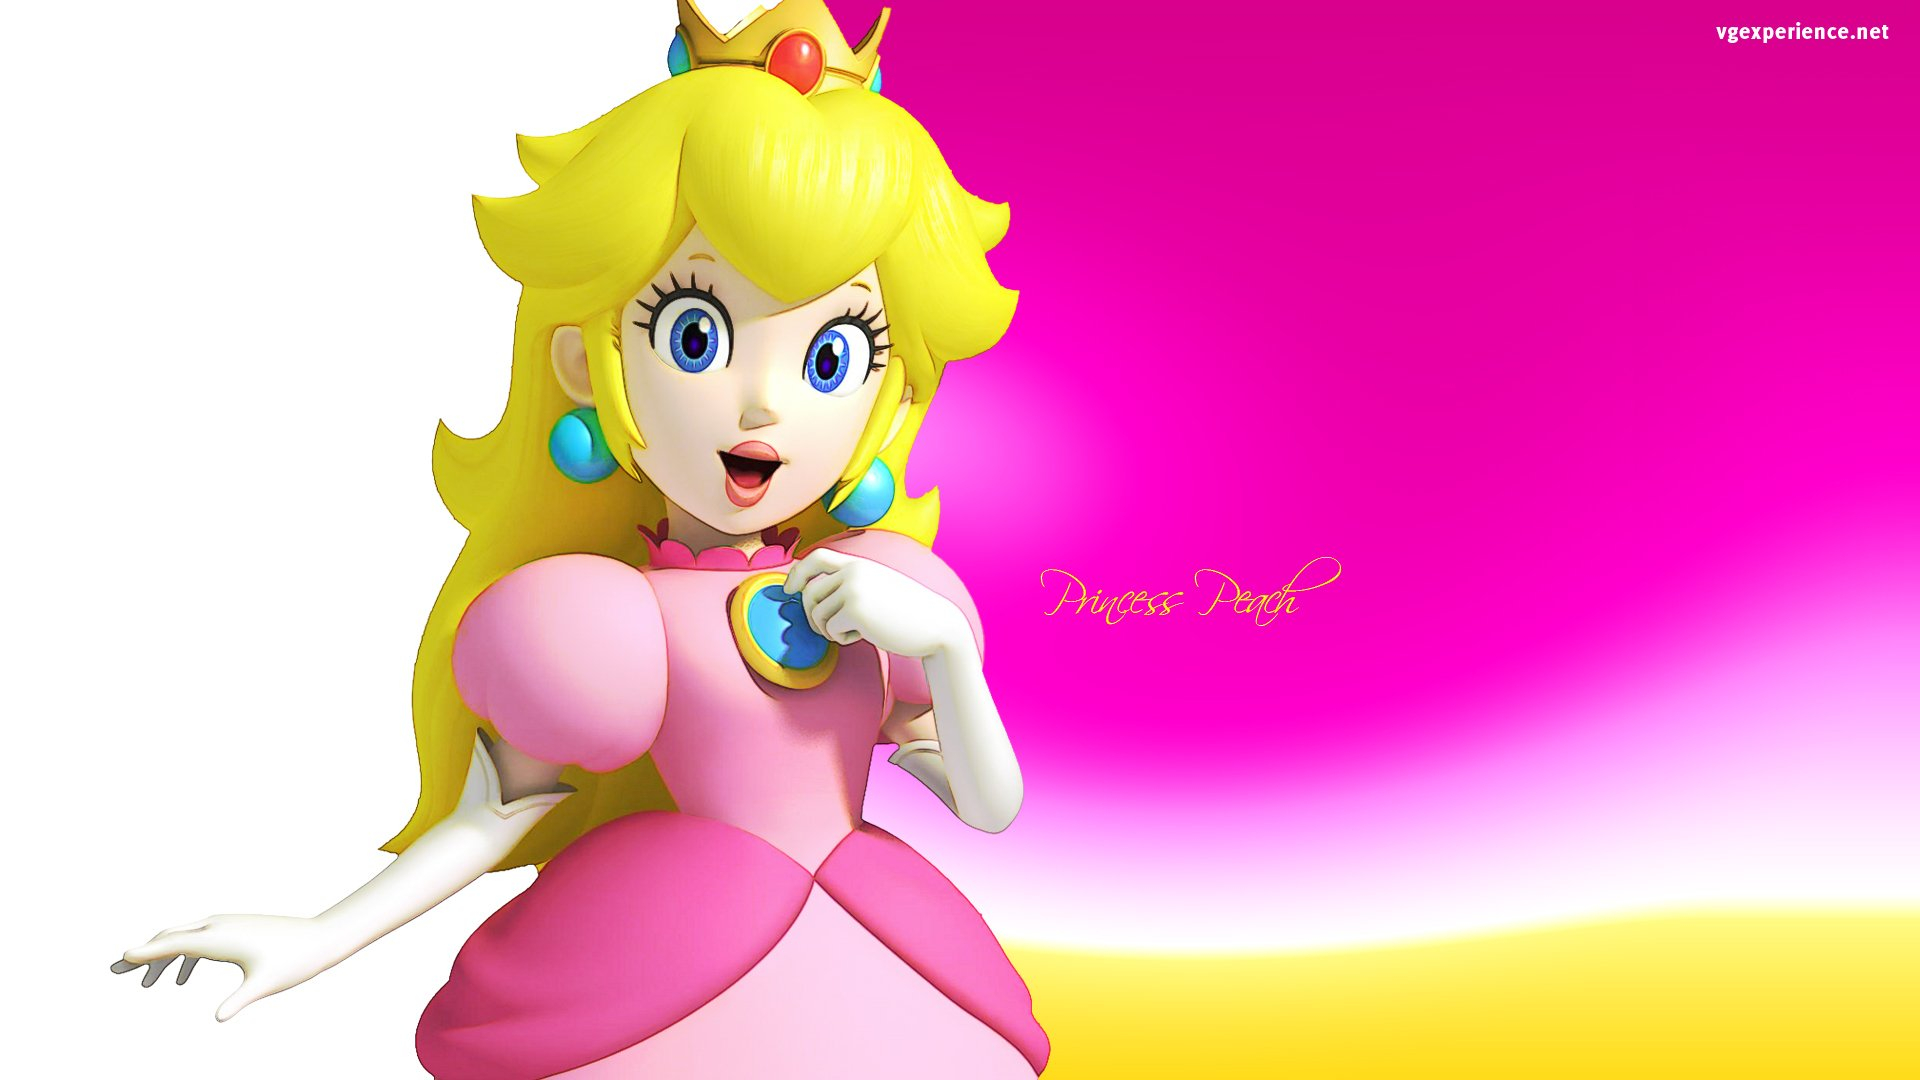 1920x1080 90+ Princess Peach HD Wallpapers and Backgrounds